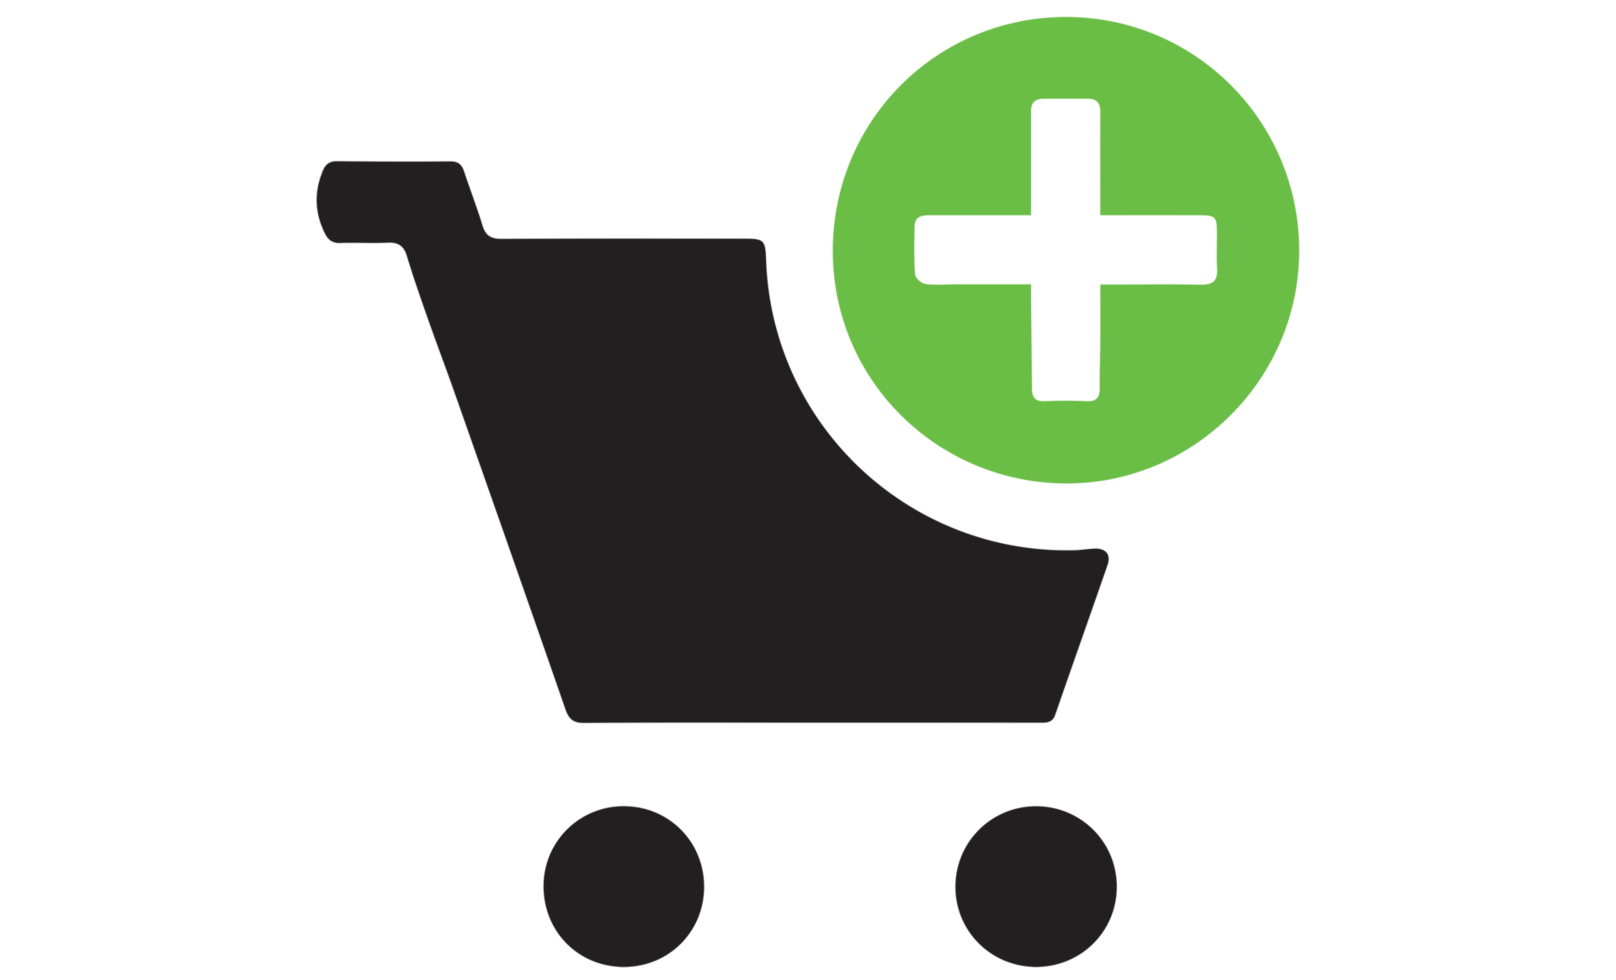 shopping cart icon - shopping basket on transparent background PNG